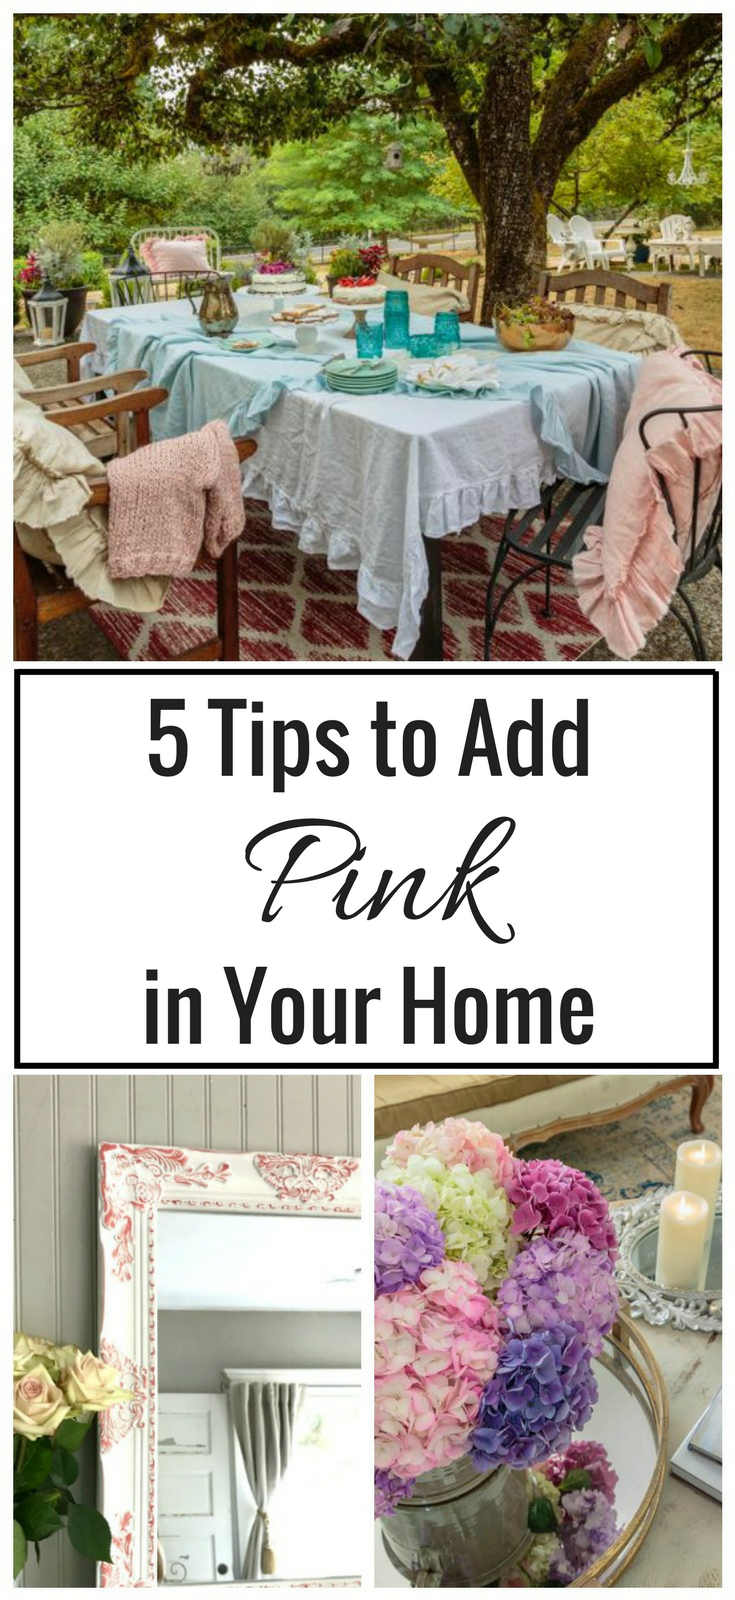 5 Tips to Add Pink in Your Home Decor